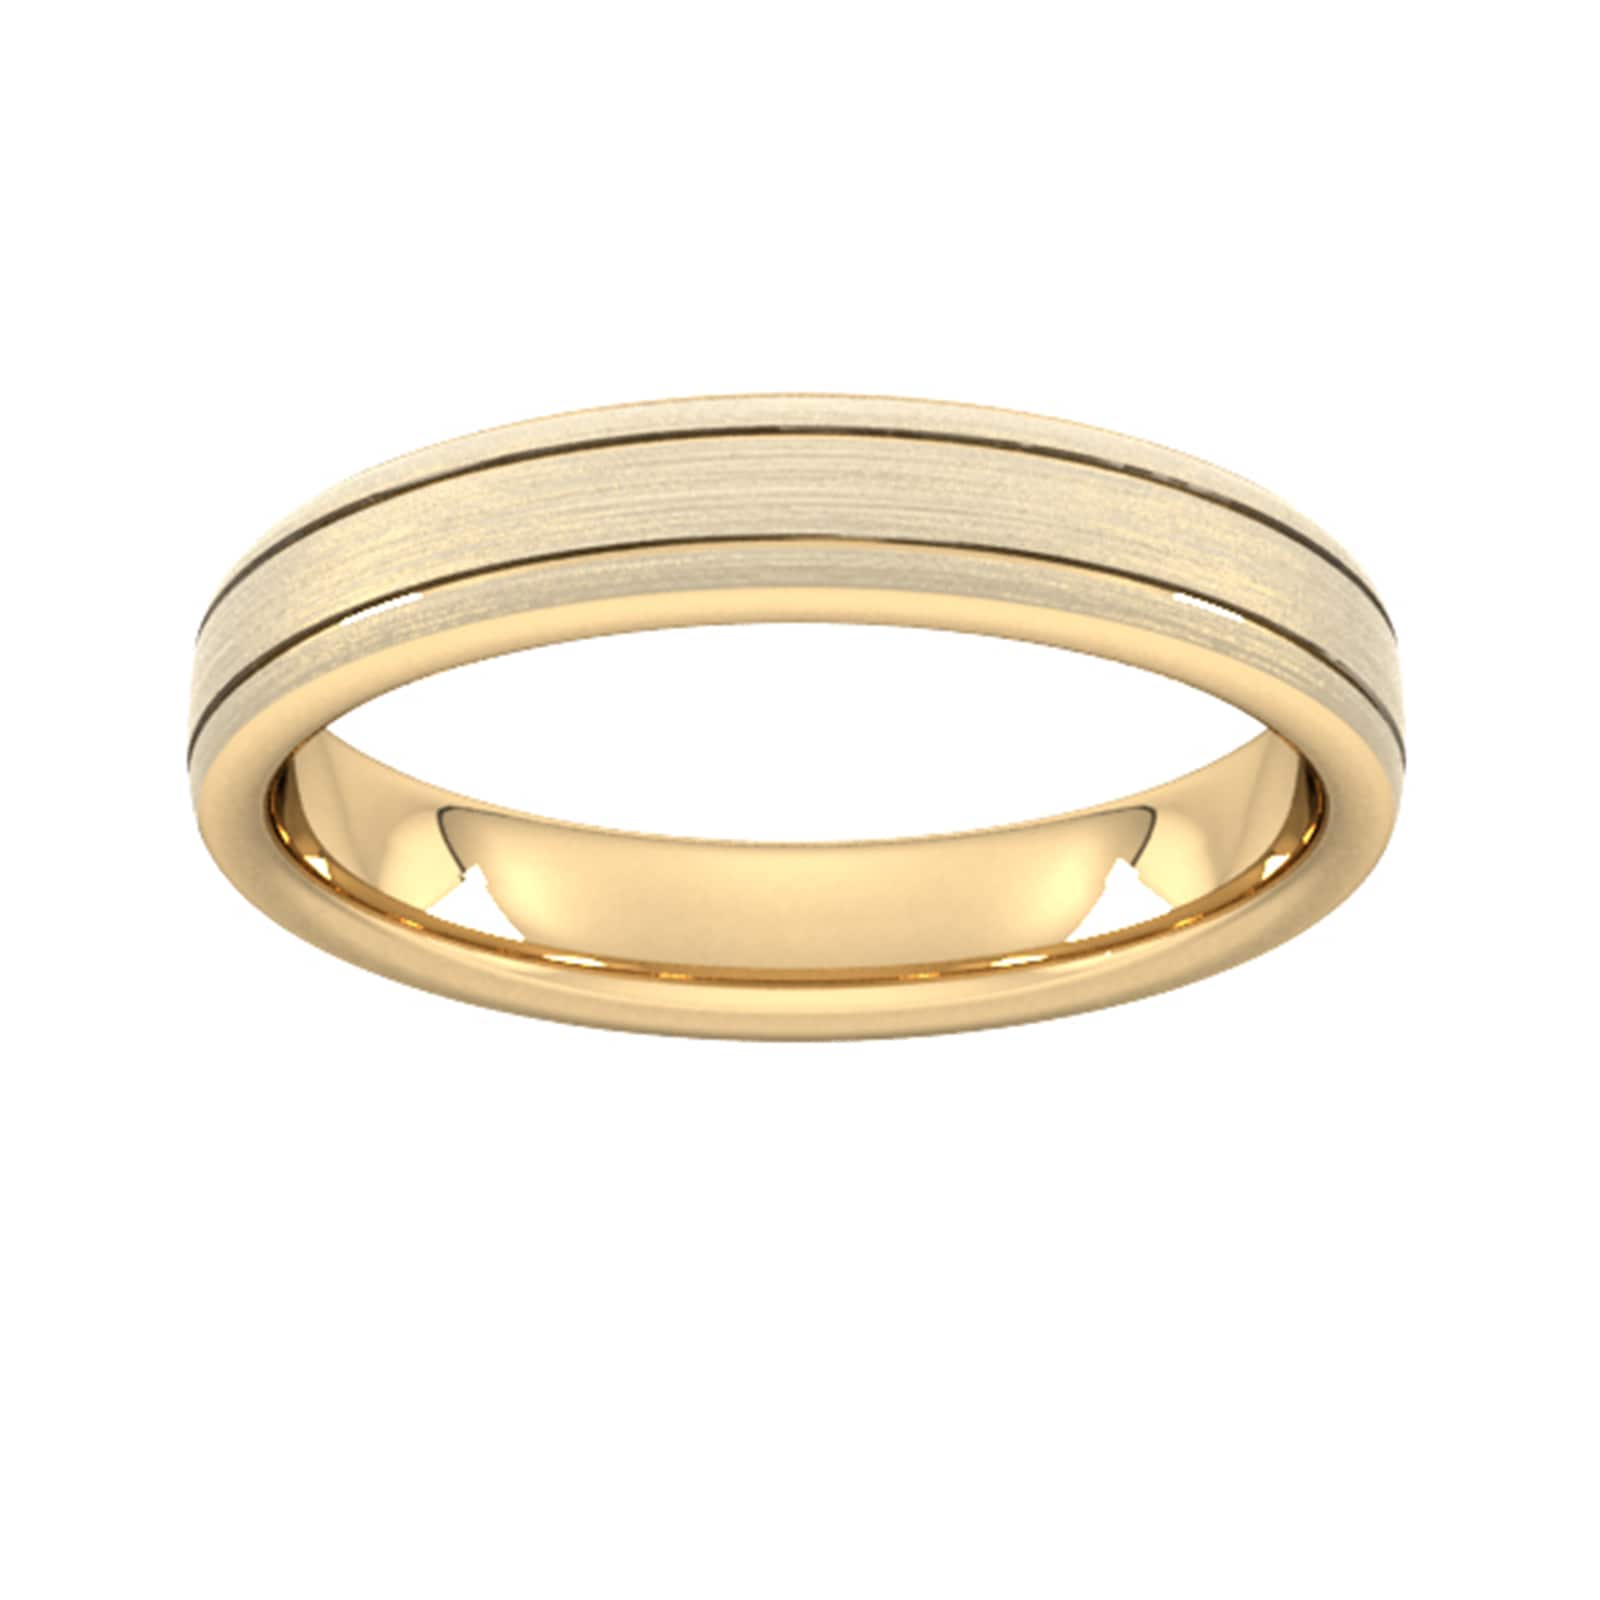 4mm Flat Court Heavy Matt Finish With Double Grooves Wedding Ring In 9 Carat Yellow Gold - Ring Size R